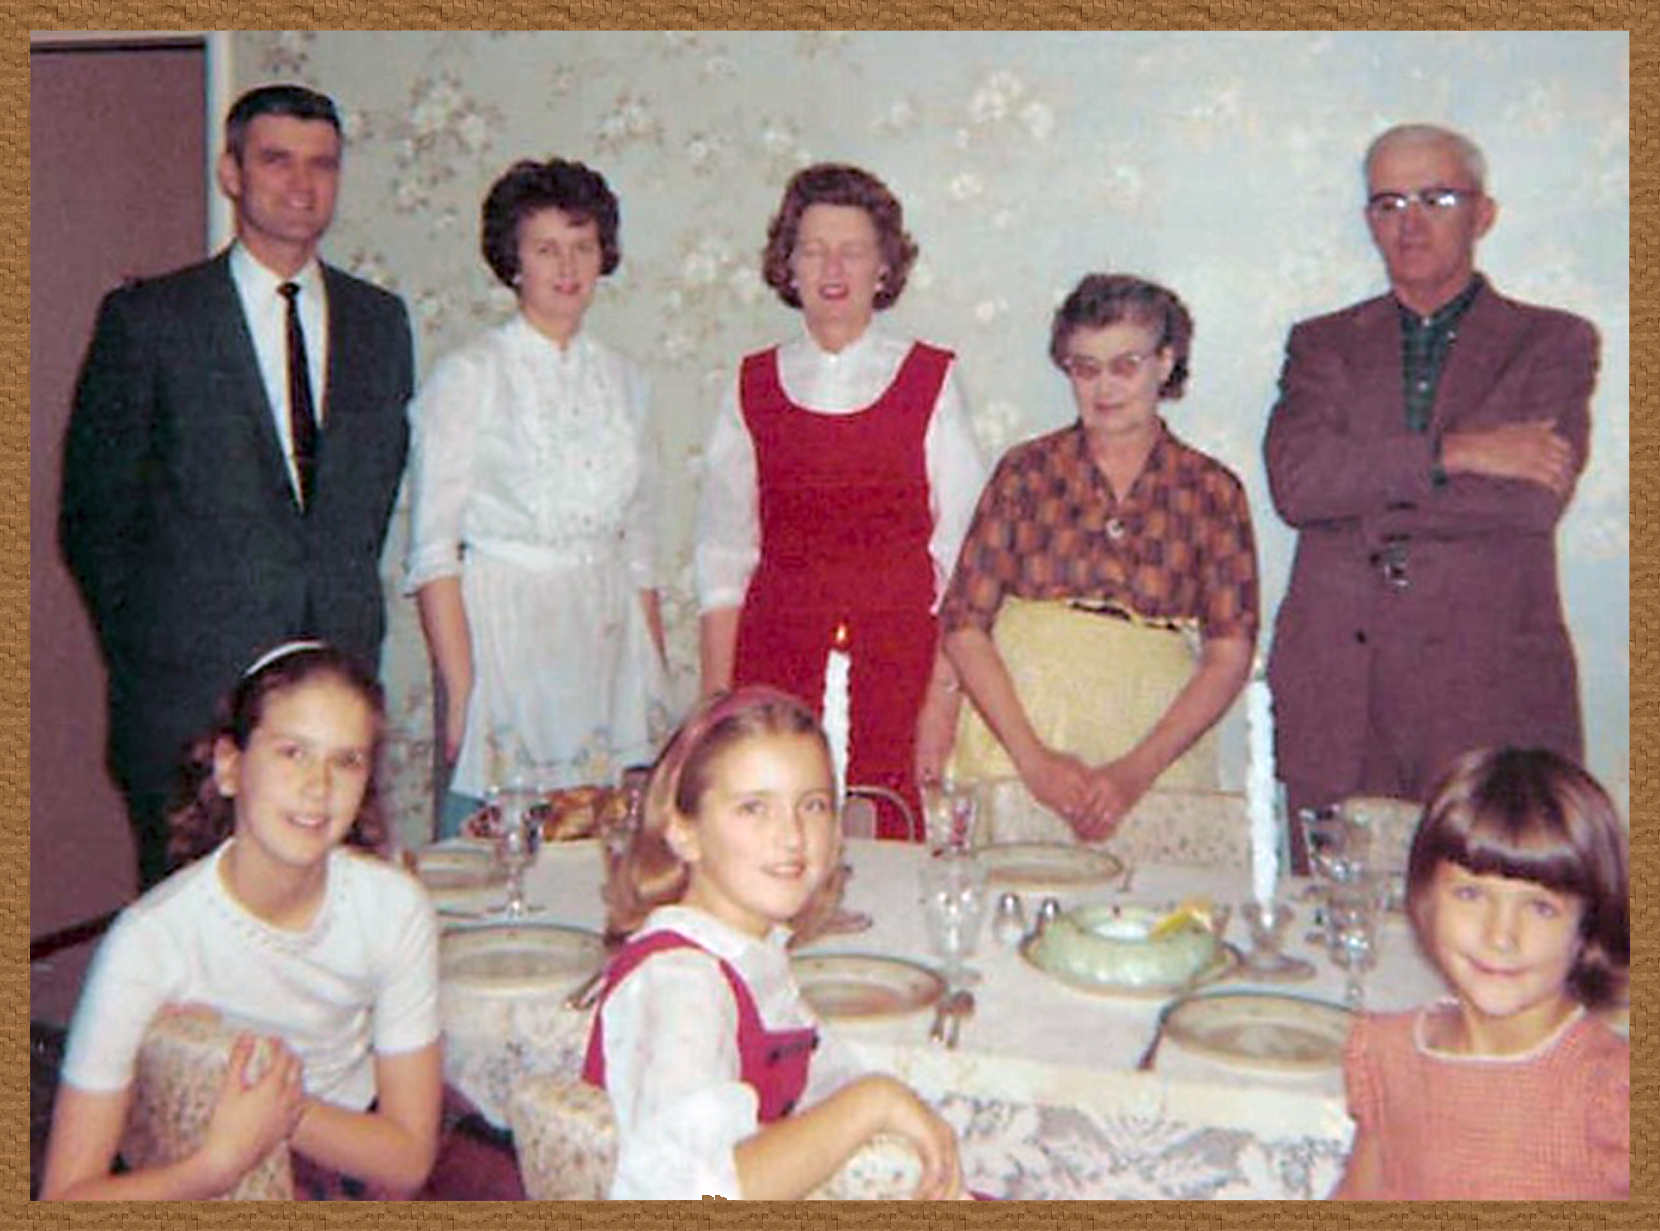 My family with grandparents in their younger days.